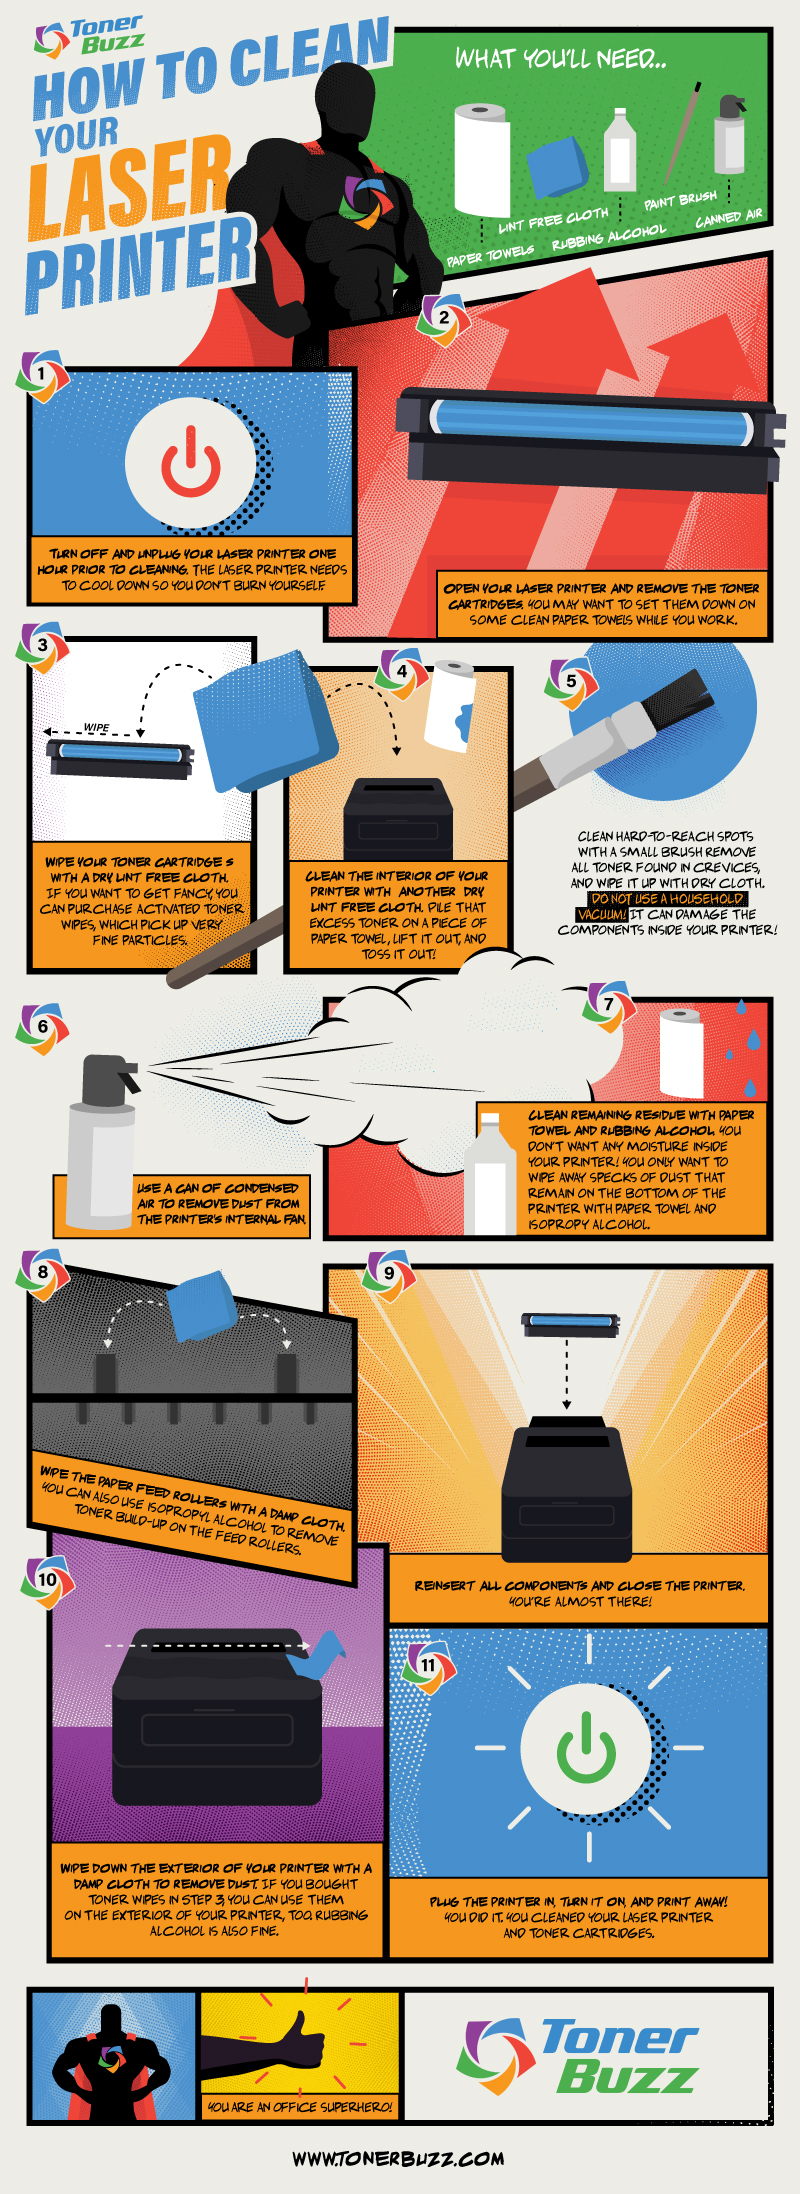 How to clean your laser printer infographic